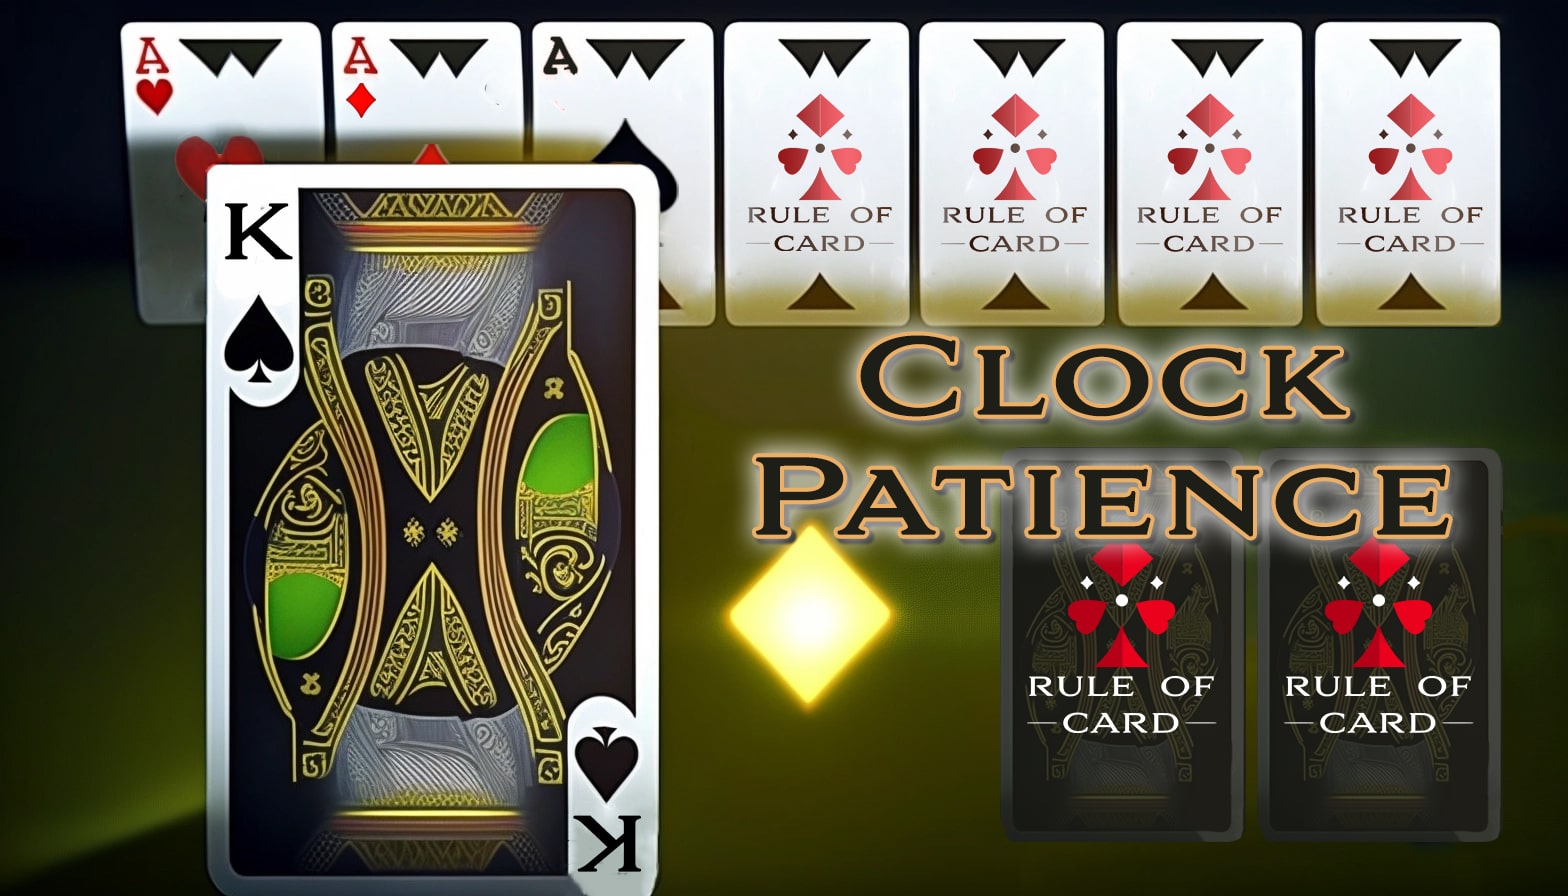 Playing the card game Clock Patience